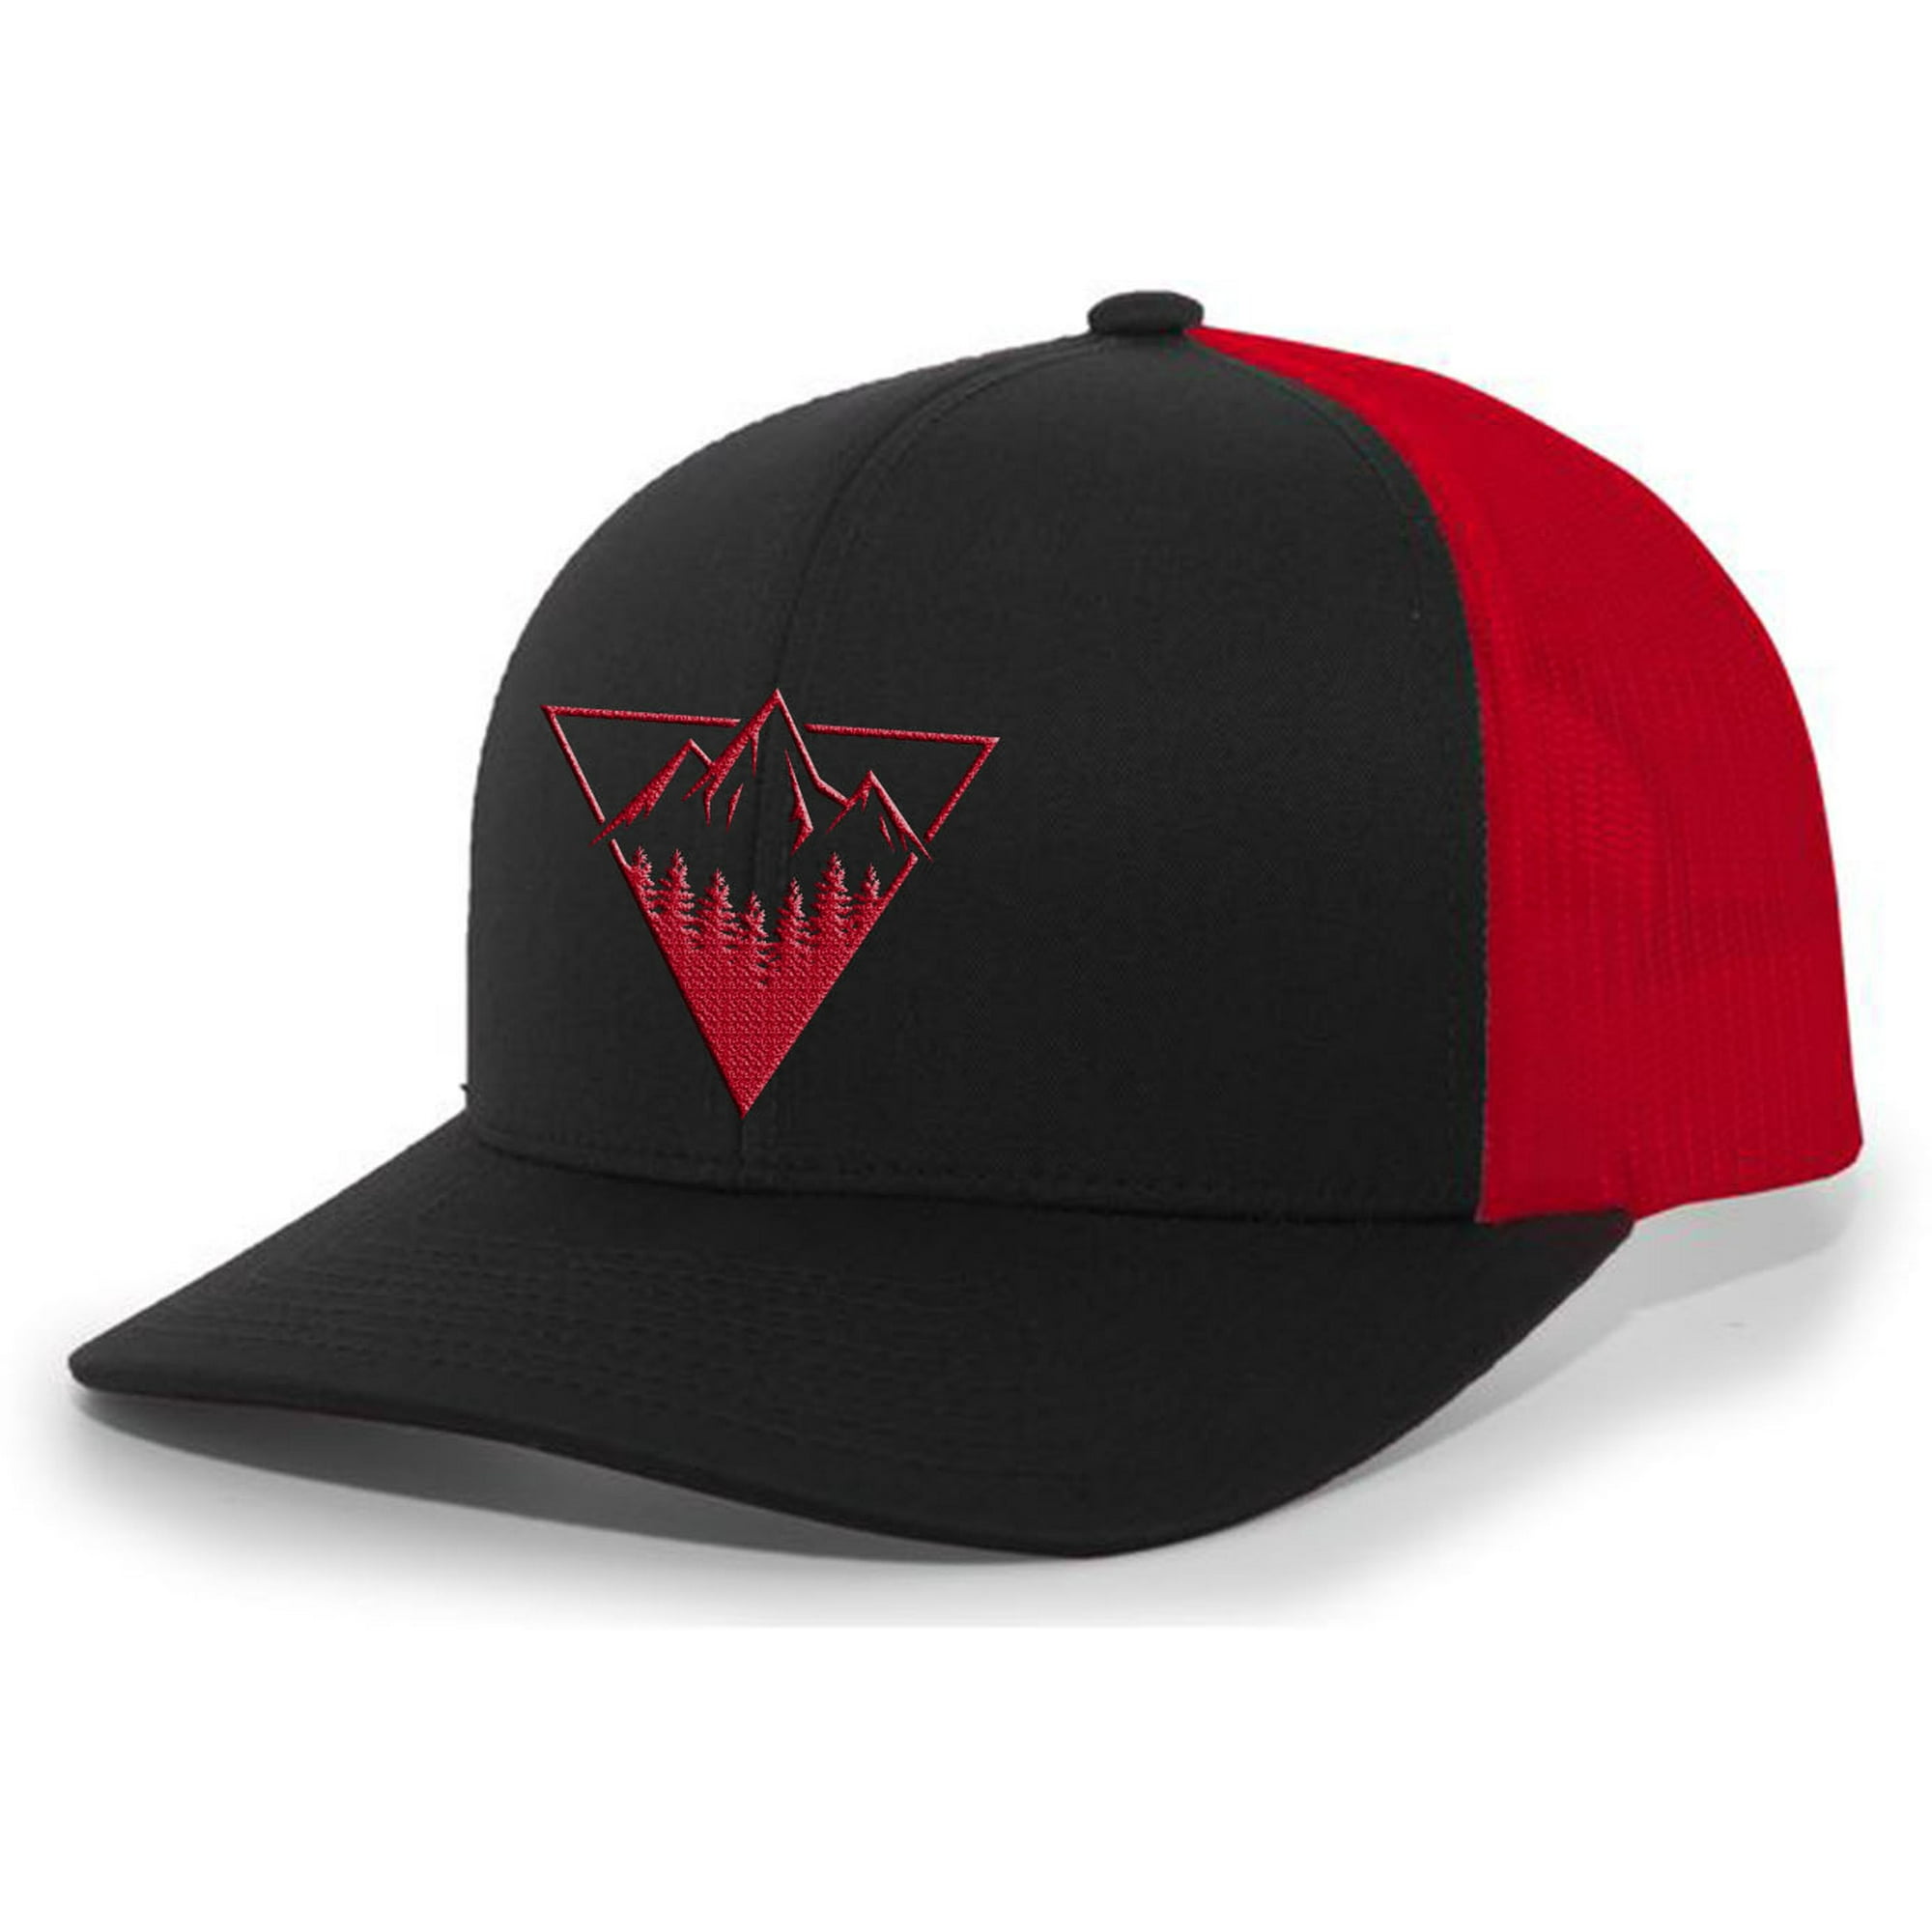 Triangle Embroidered Trucker Hat